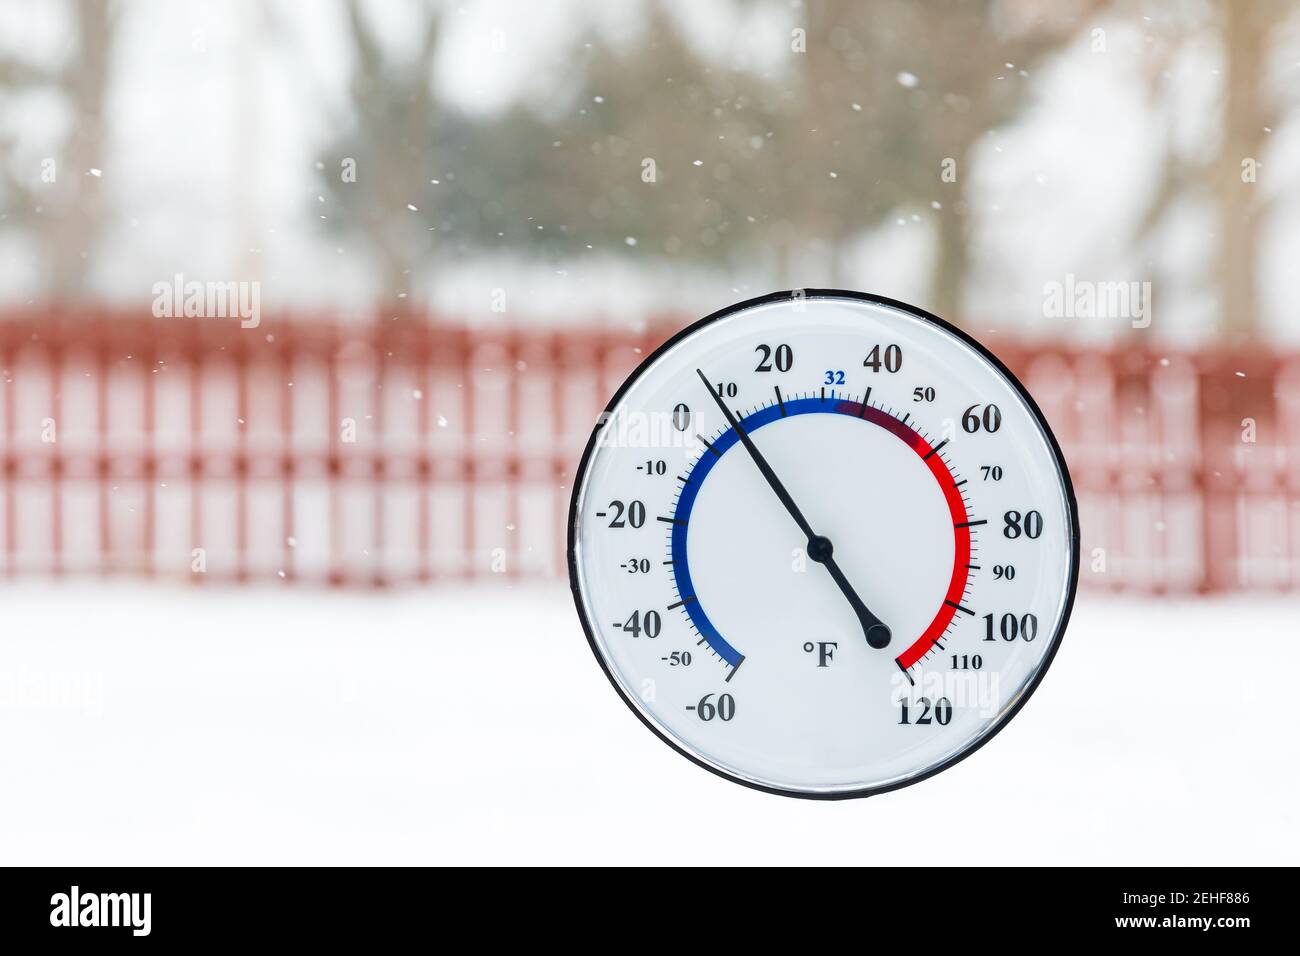 https://c8.alamy.com/comp/2EHF886/thermometer-showing-cold-temperature-during-winter-snowstorm-concept-of-freezing-weather-cold-temperature-and-winter-safety-2EHF886.jpg